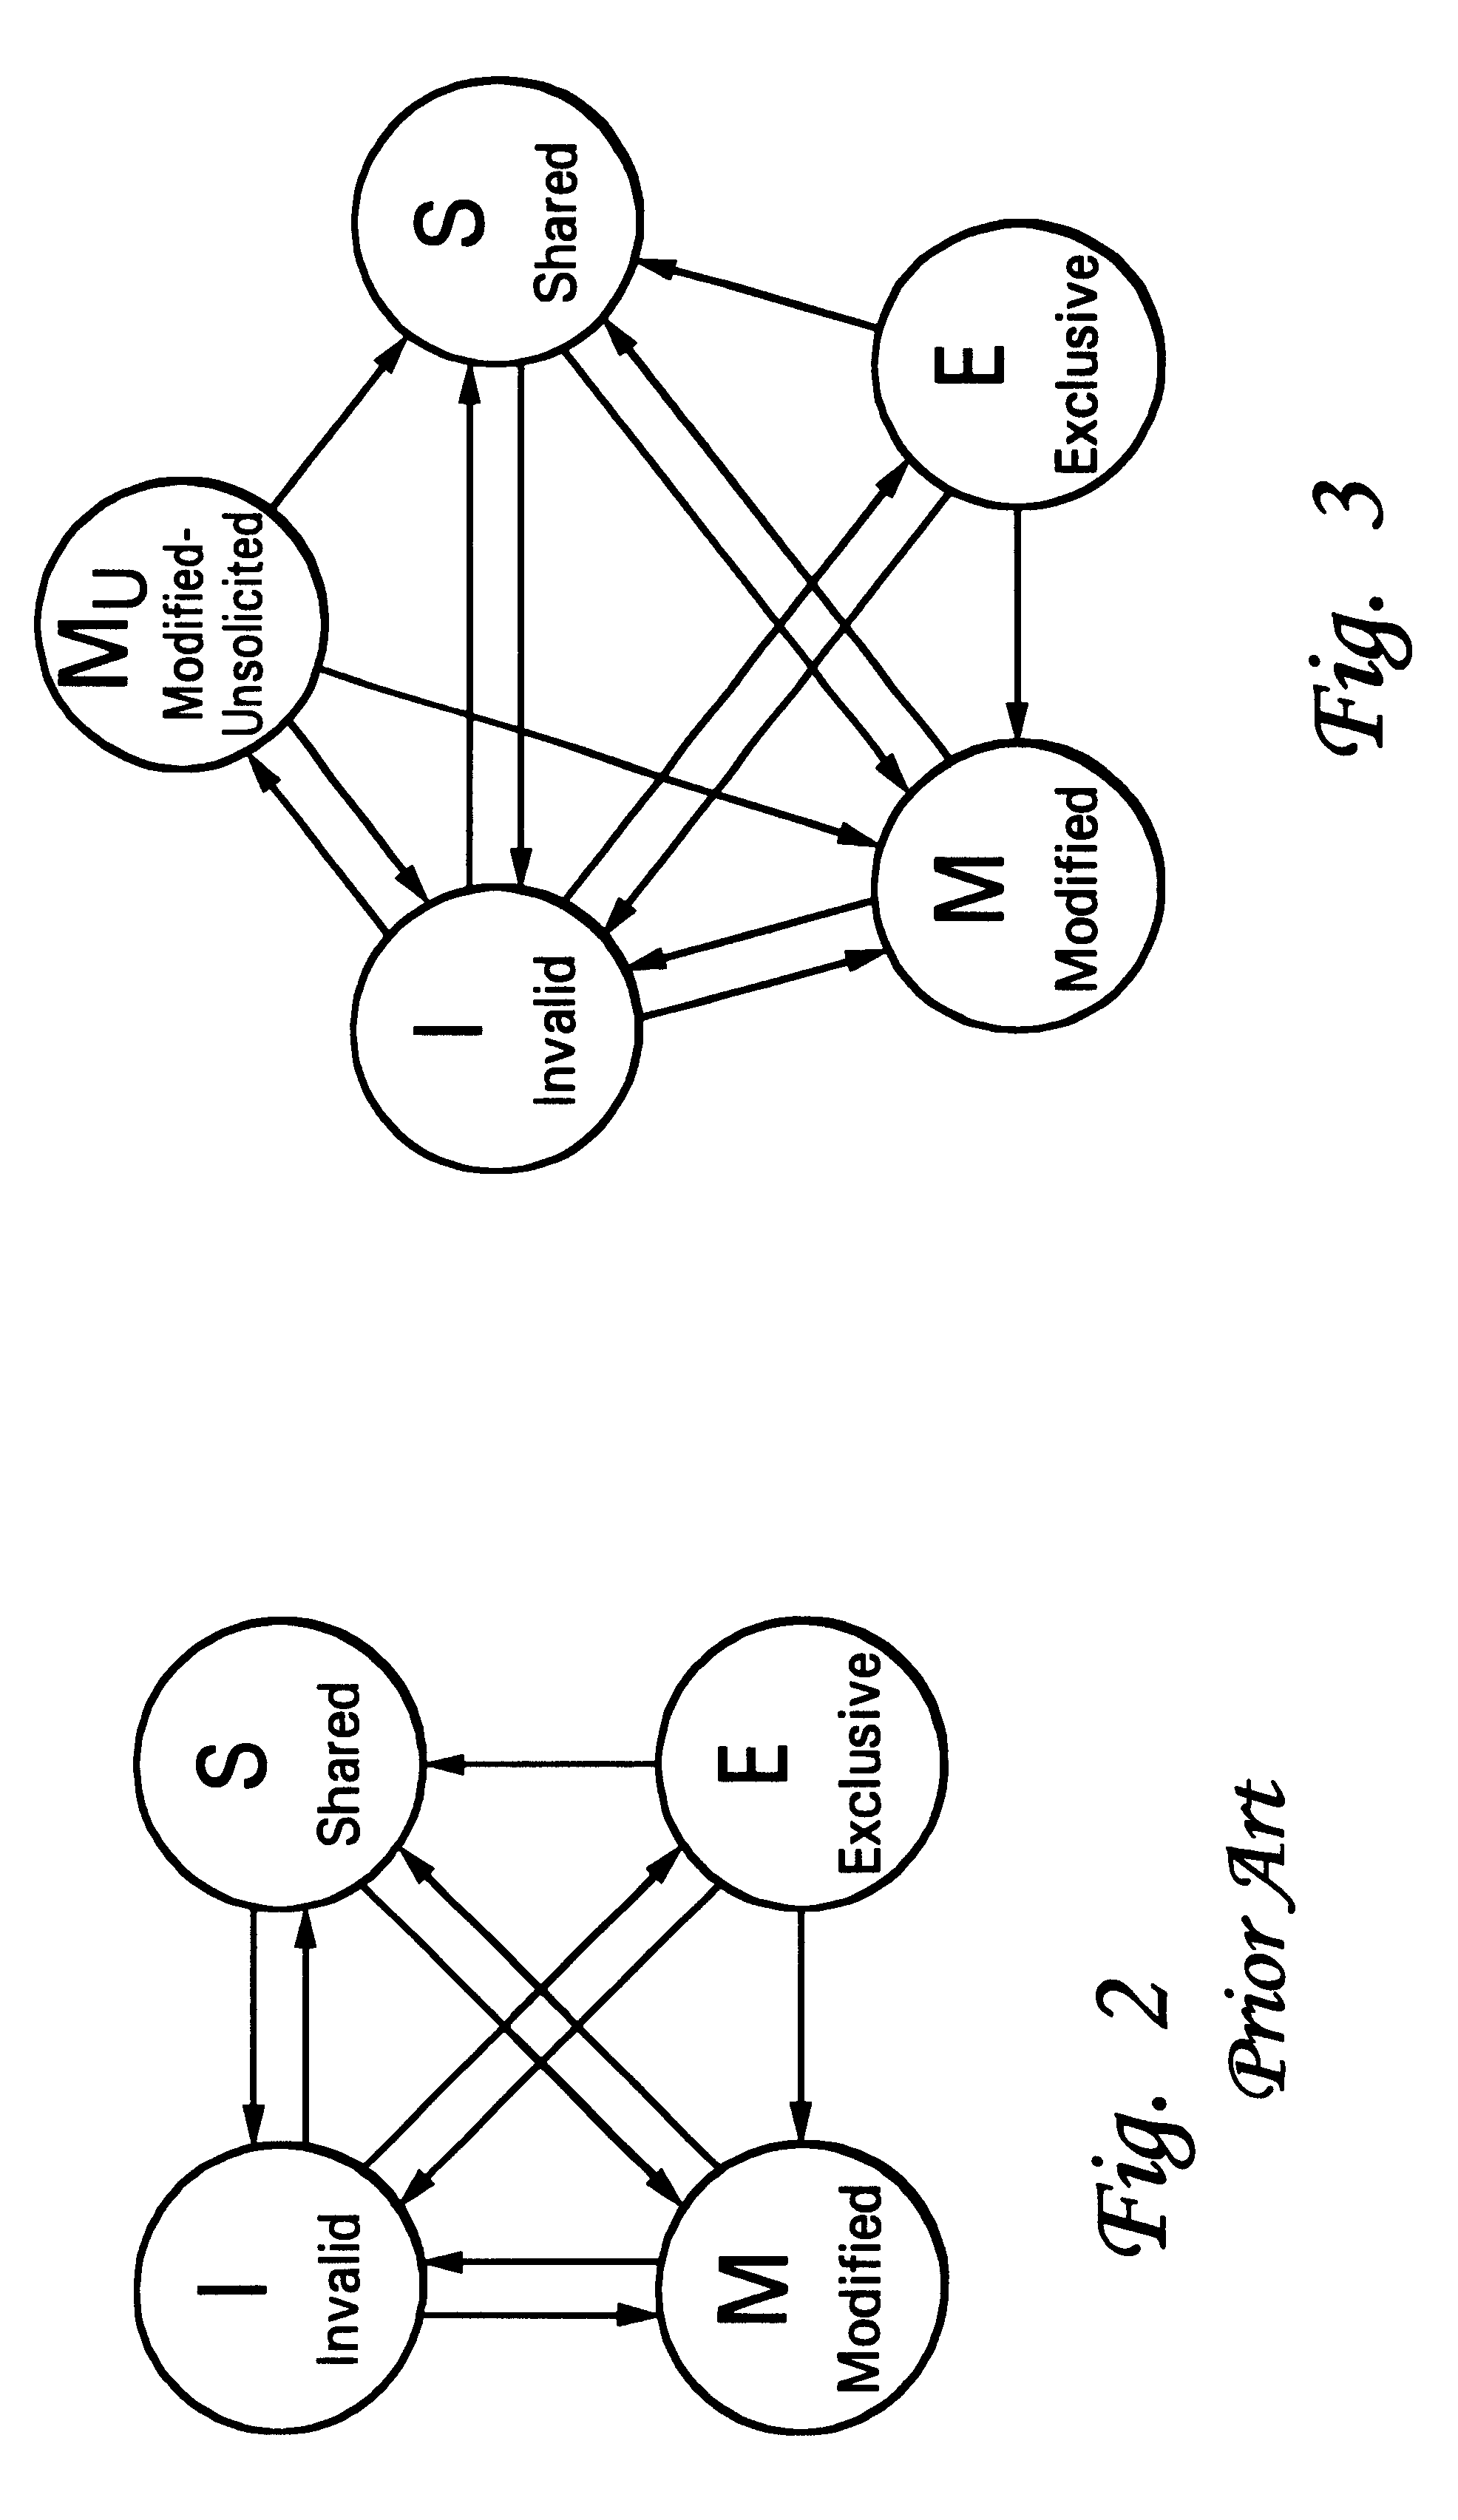 Cache coherency protocol employing a read operation including a programmable flag to indicate deallocation of an intervened cache line